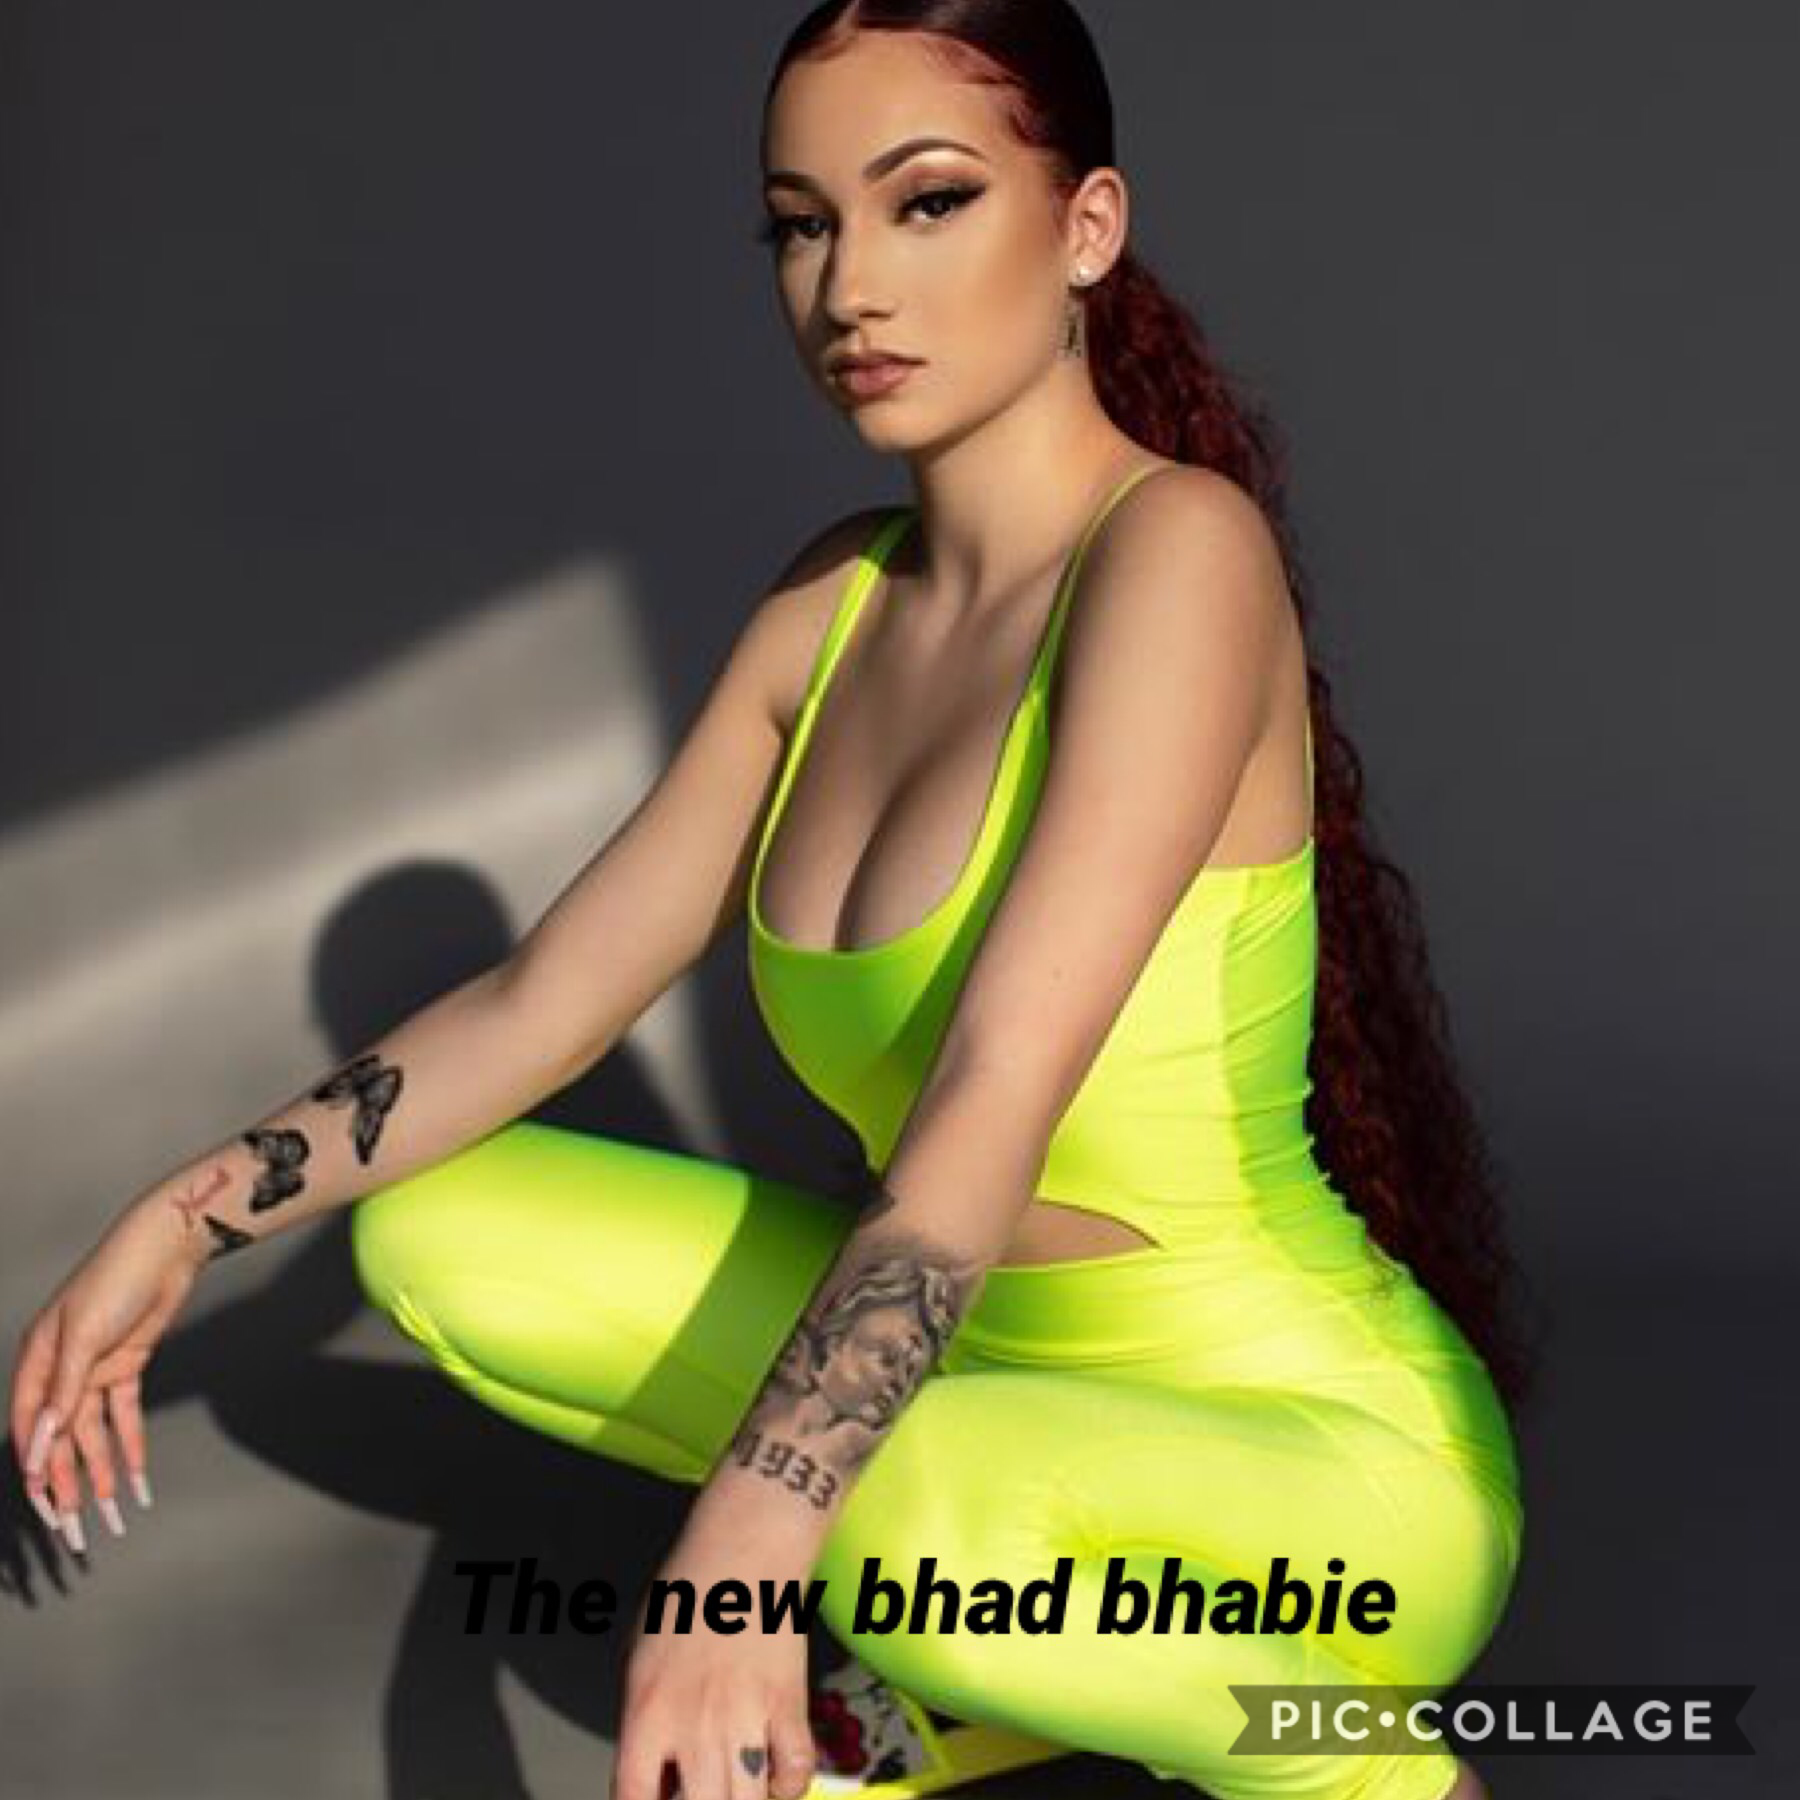 The new bhad bhabie 